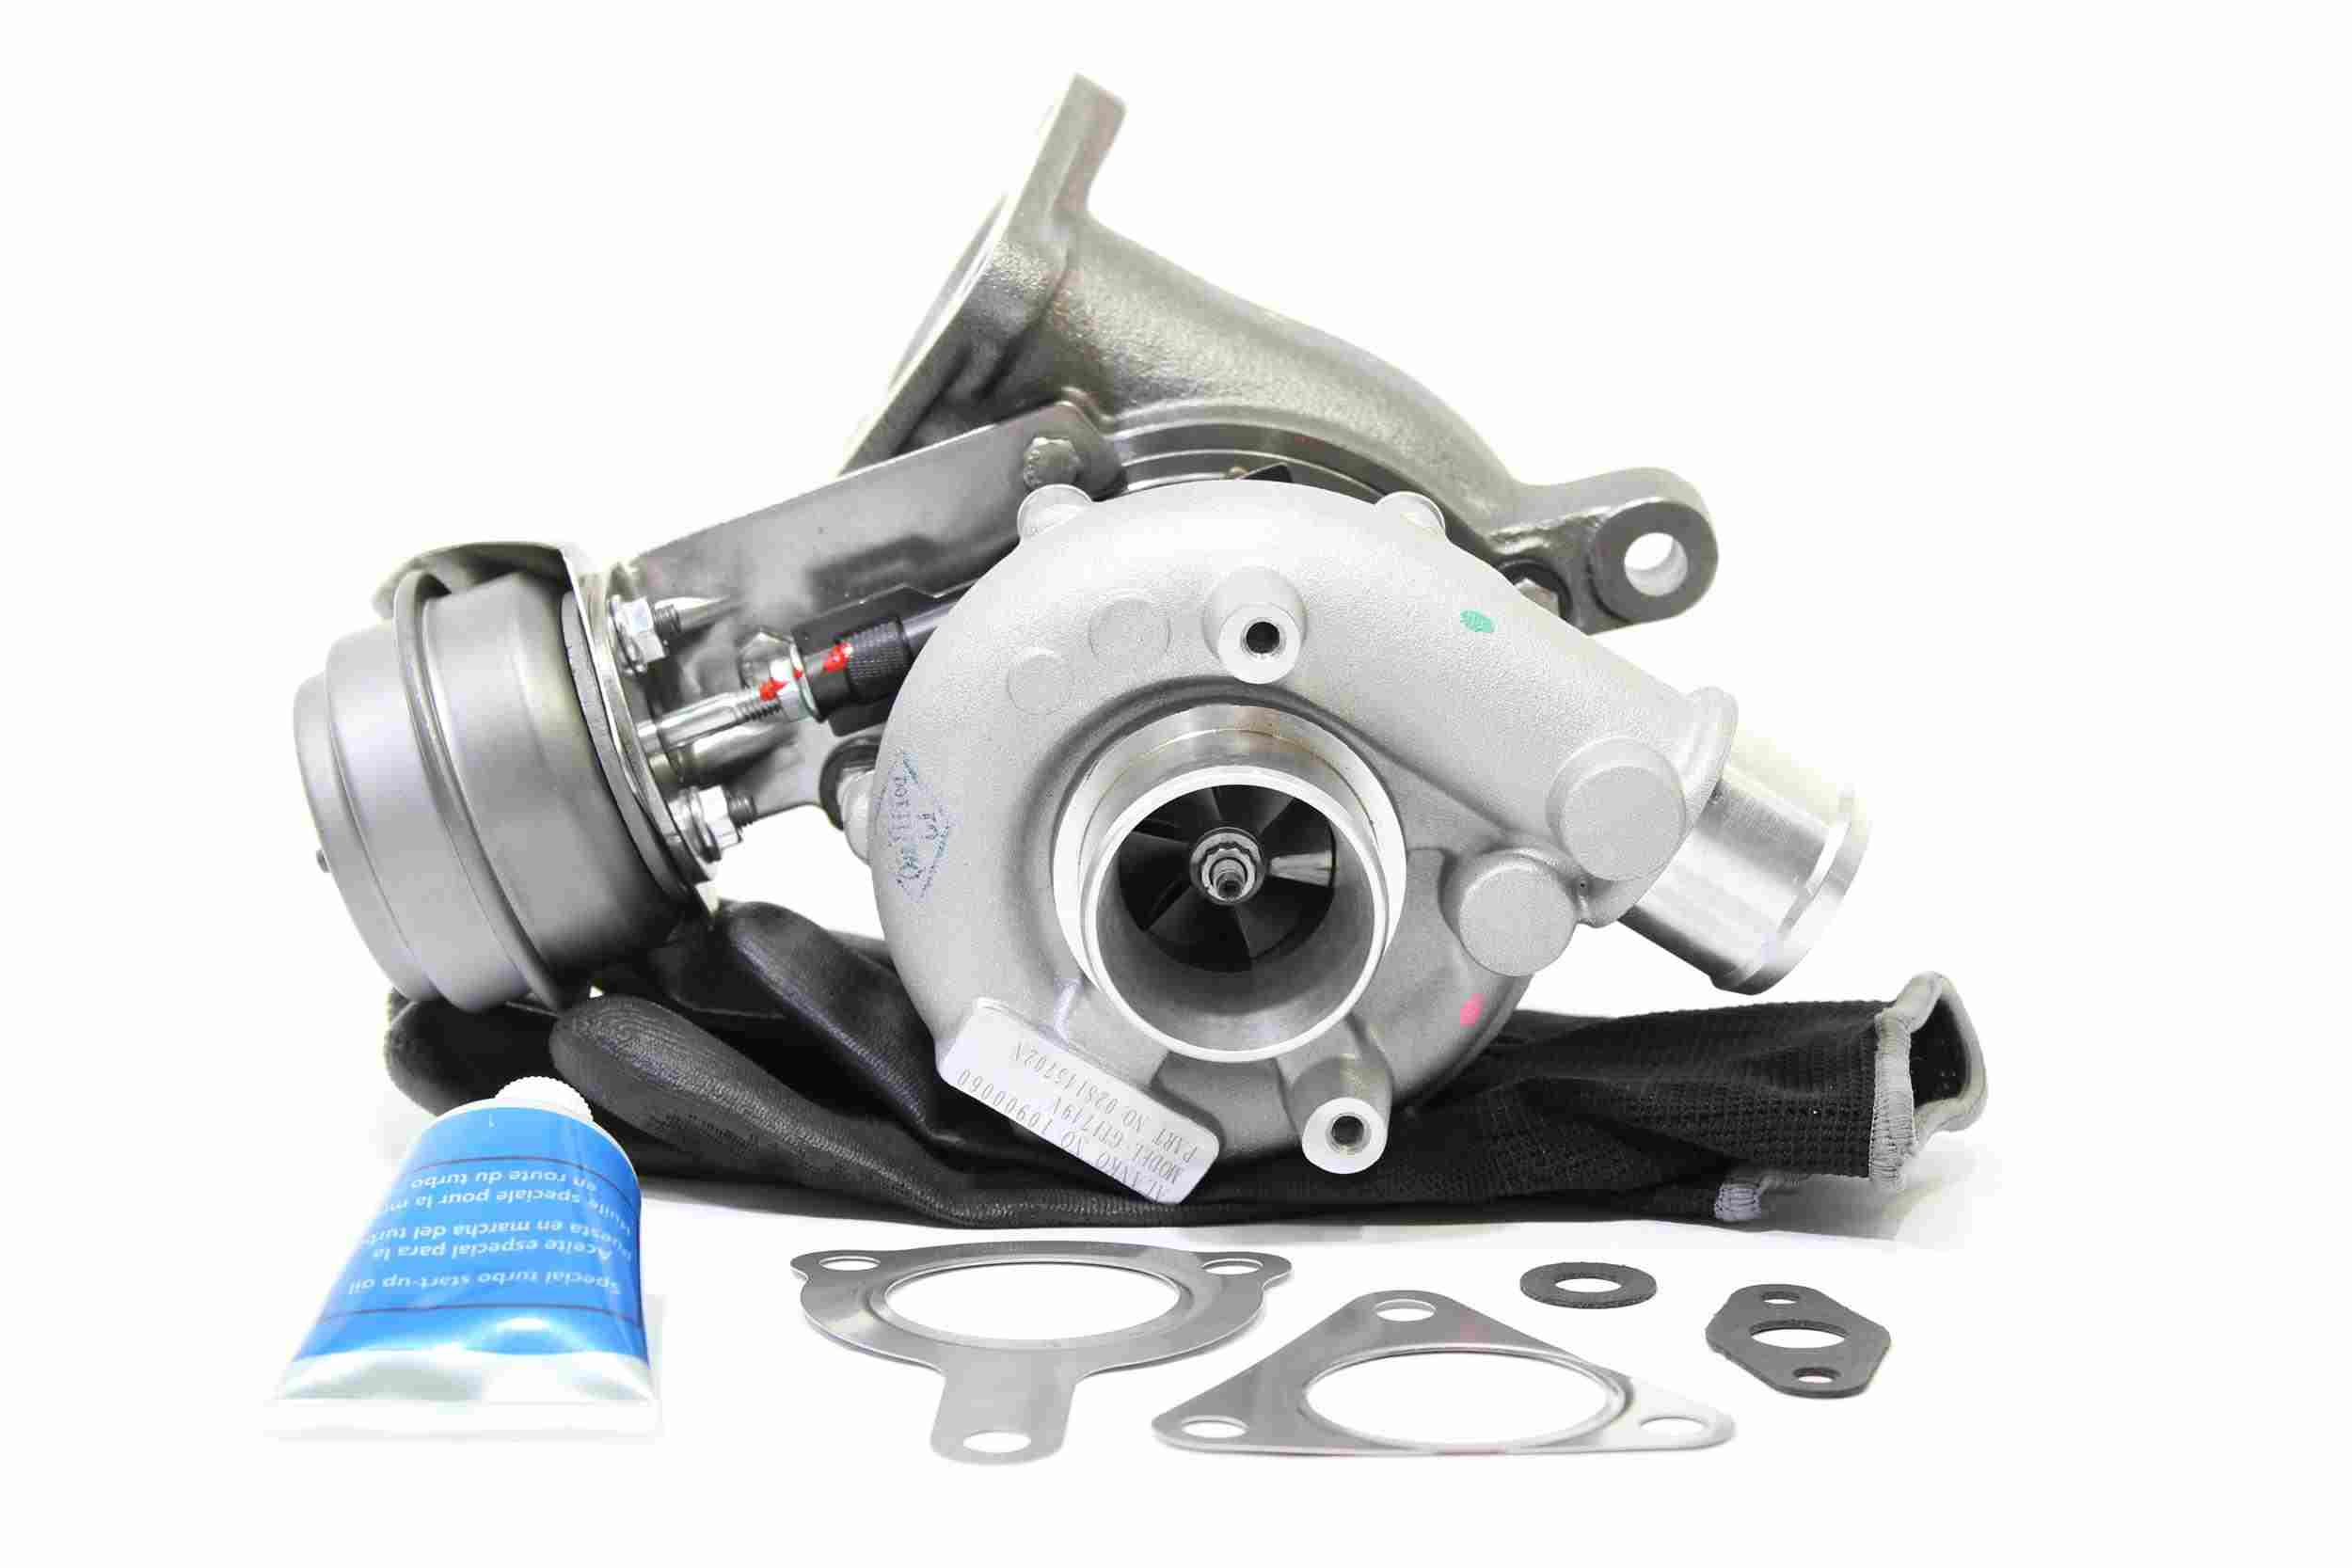 ALANKO 10900060 Turbocharger Exhaust Turbocharger, Incl. Gasket Set, with attachment material